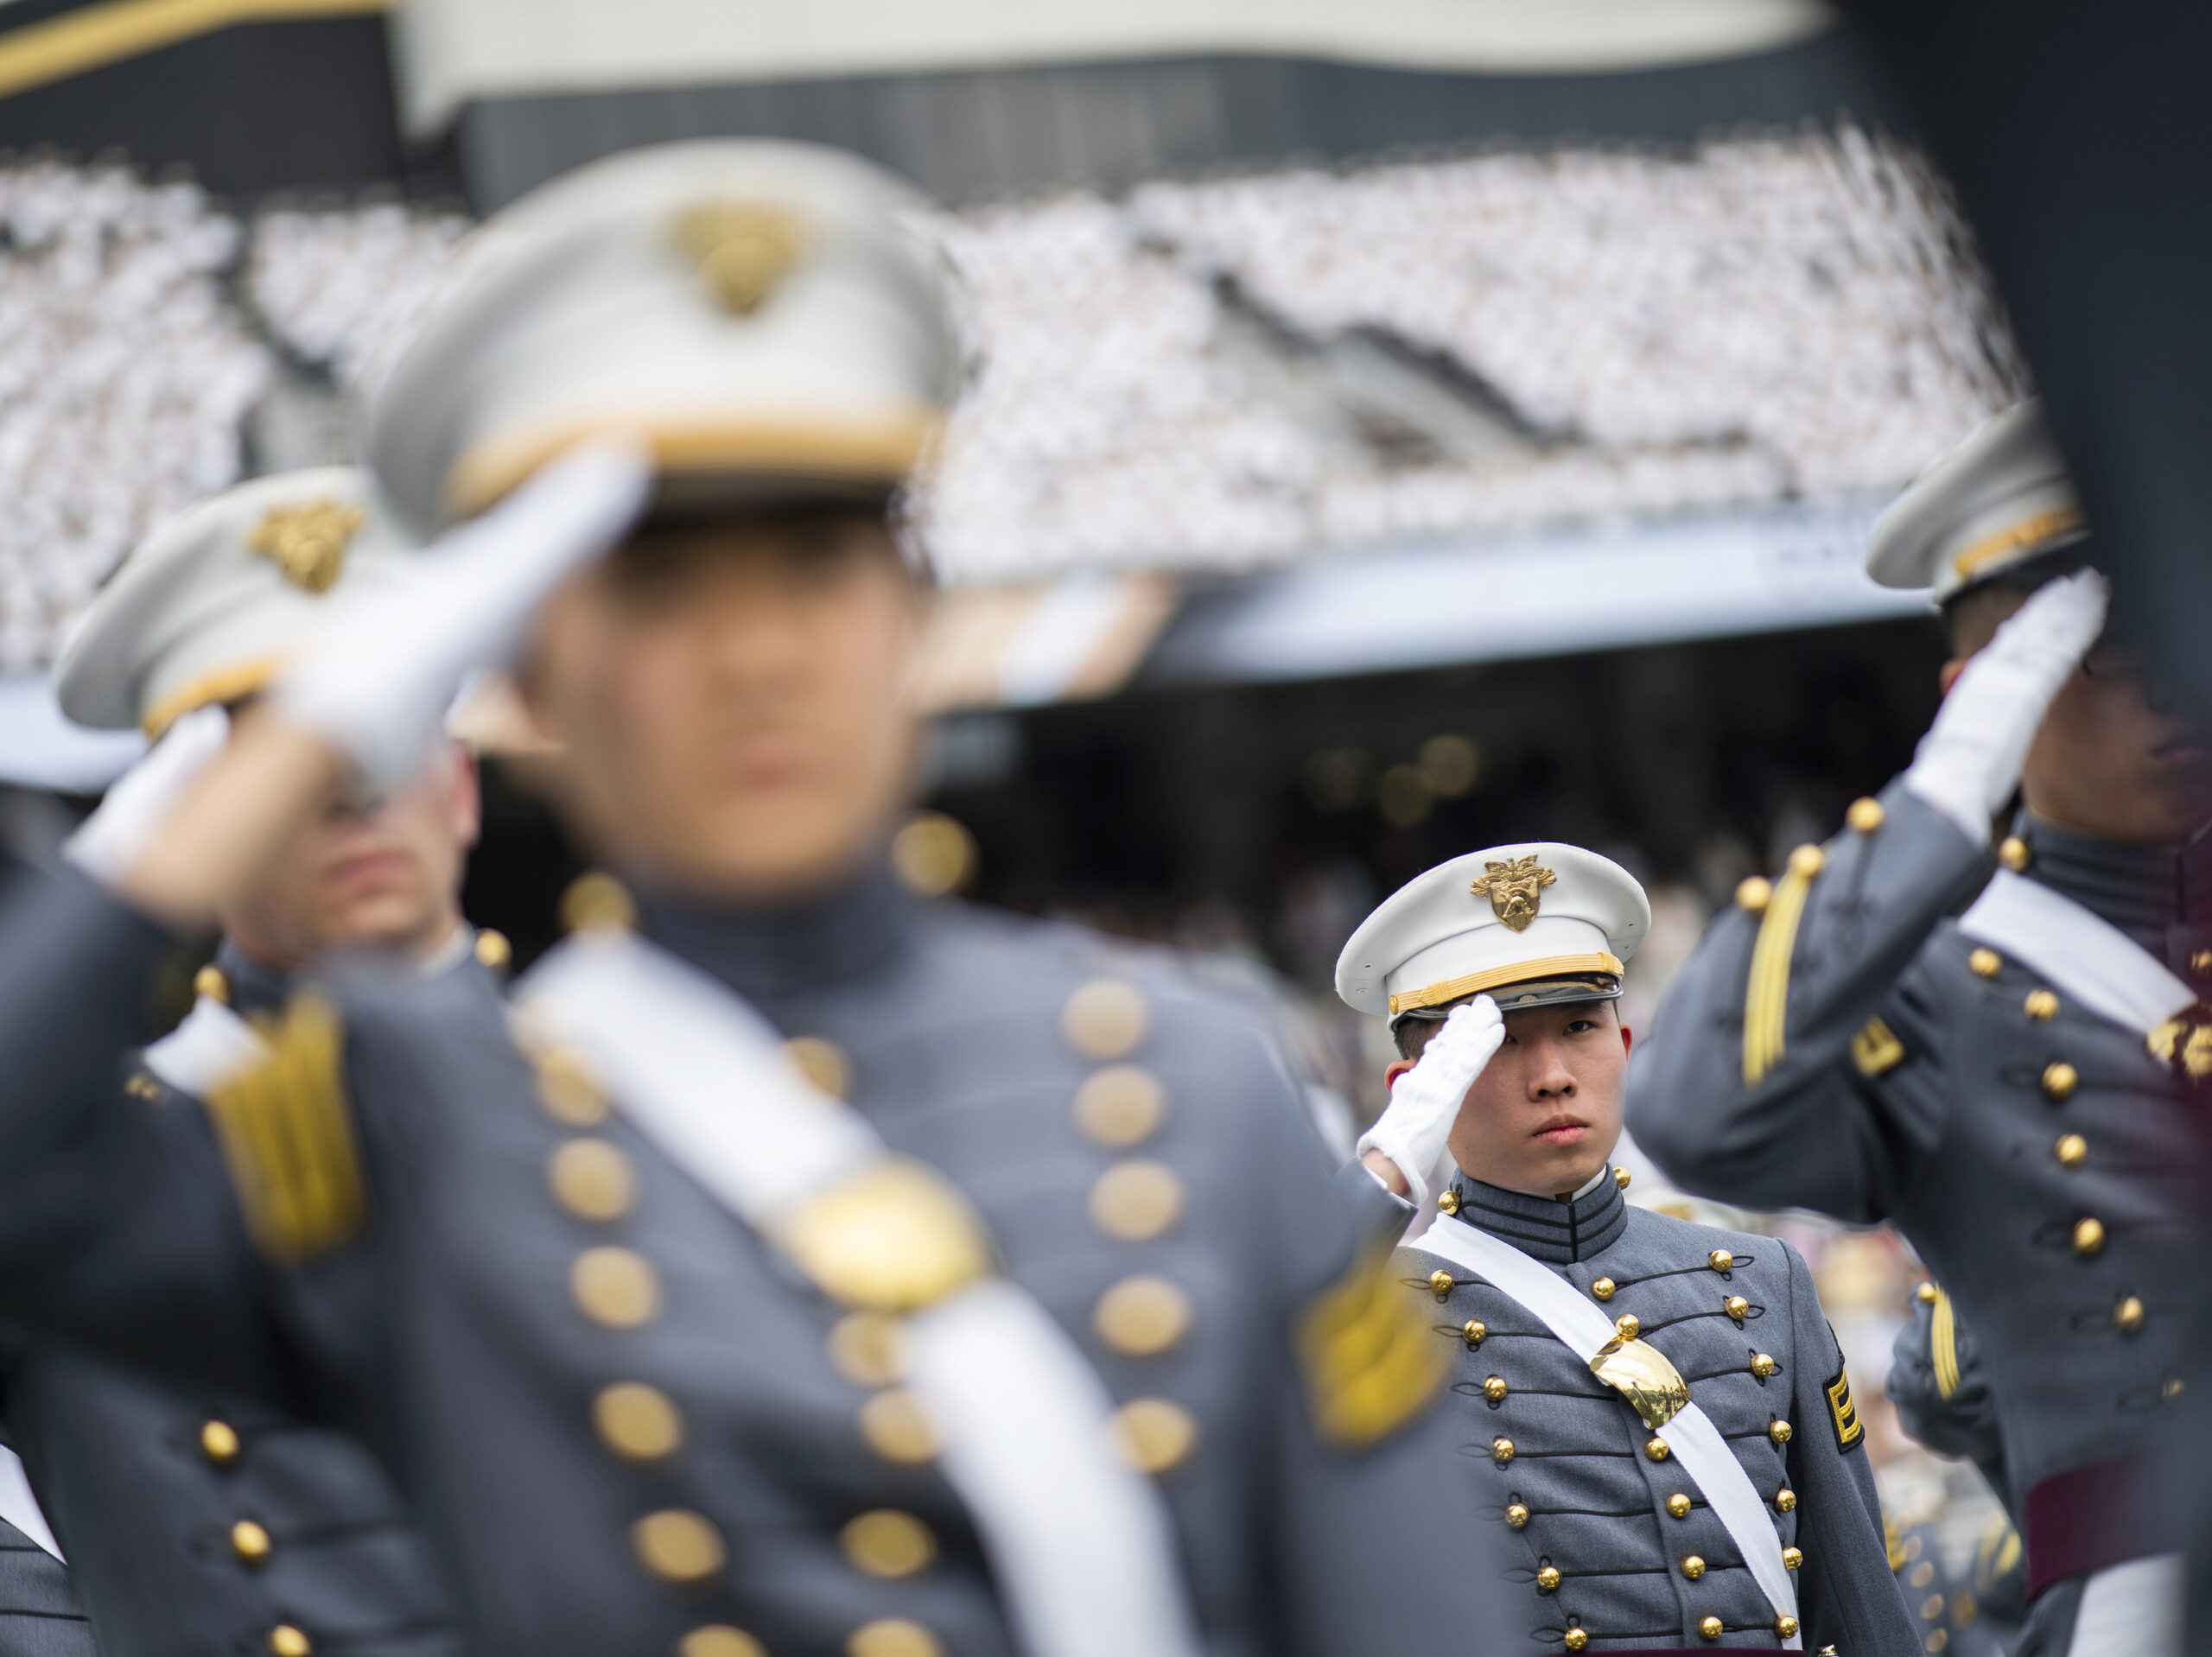 West Point axed ‘duty, honor, country’ from its mission statement. Conservatives fumed